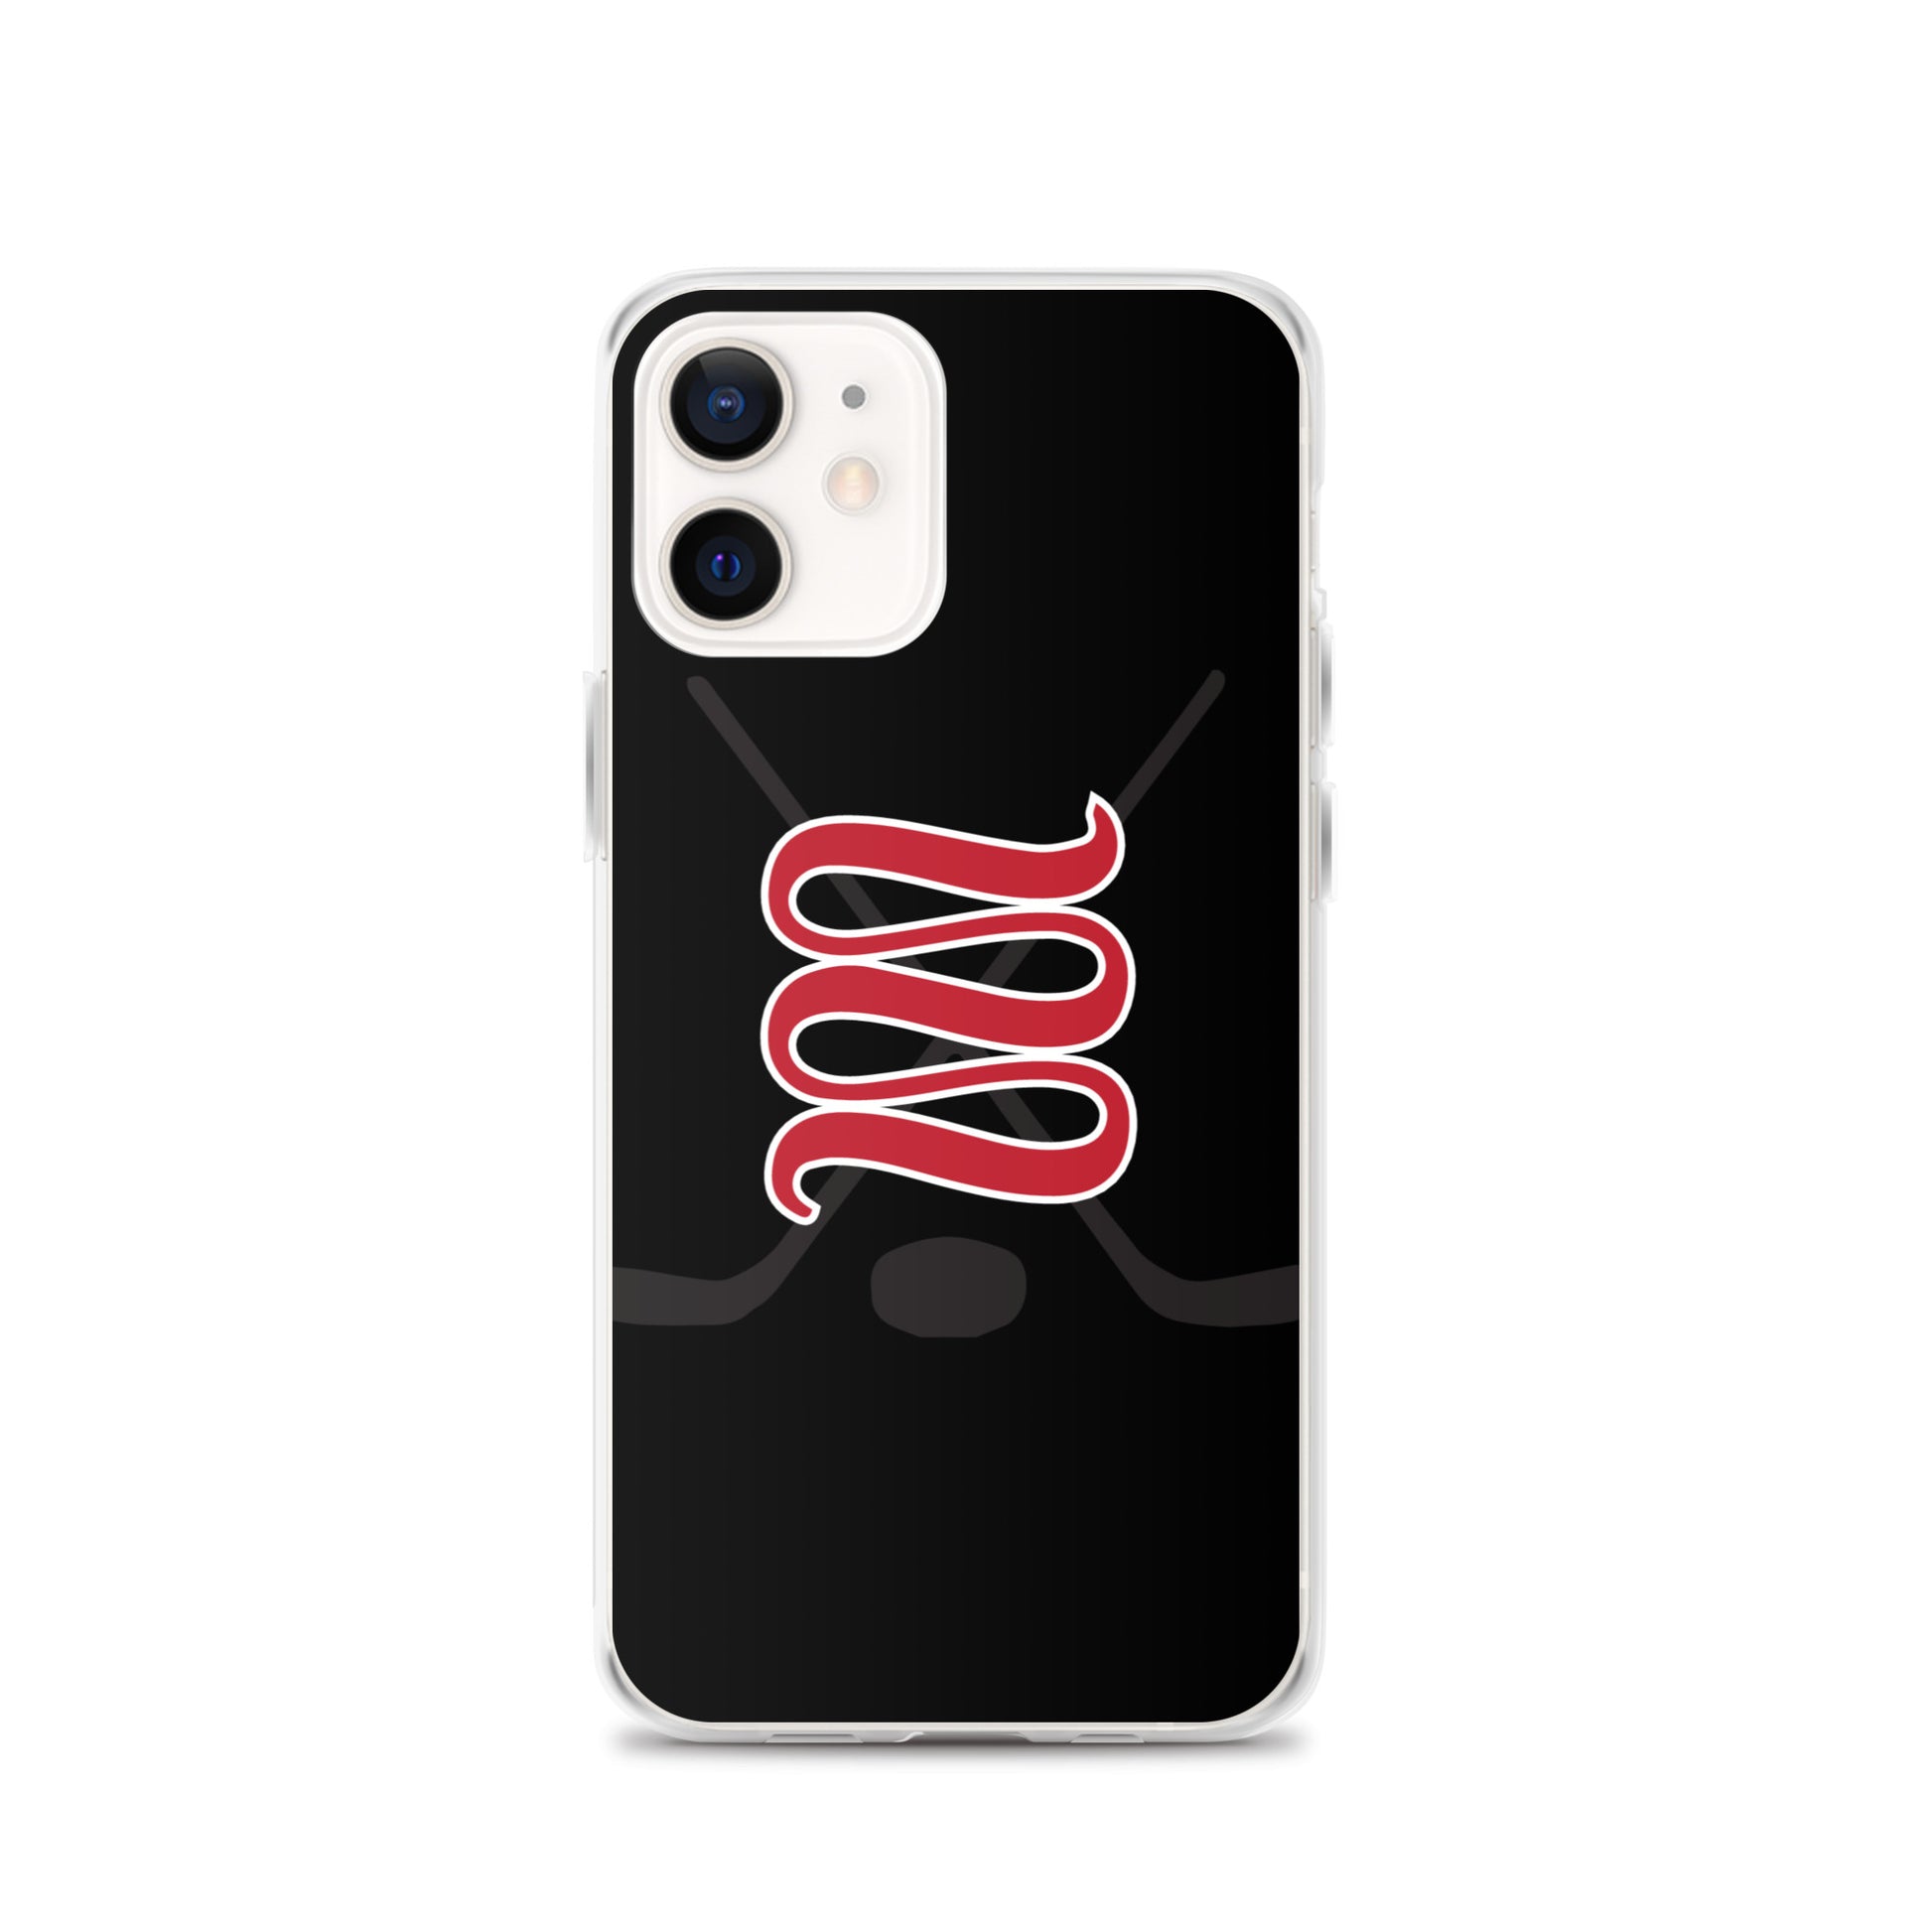 Clear smartphone case with a black background, featuring a bold red intertwined design centered on the back.